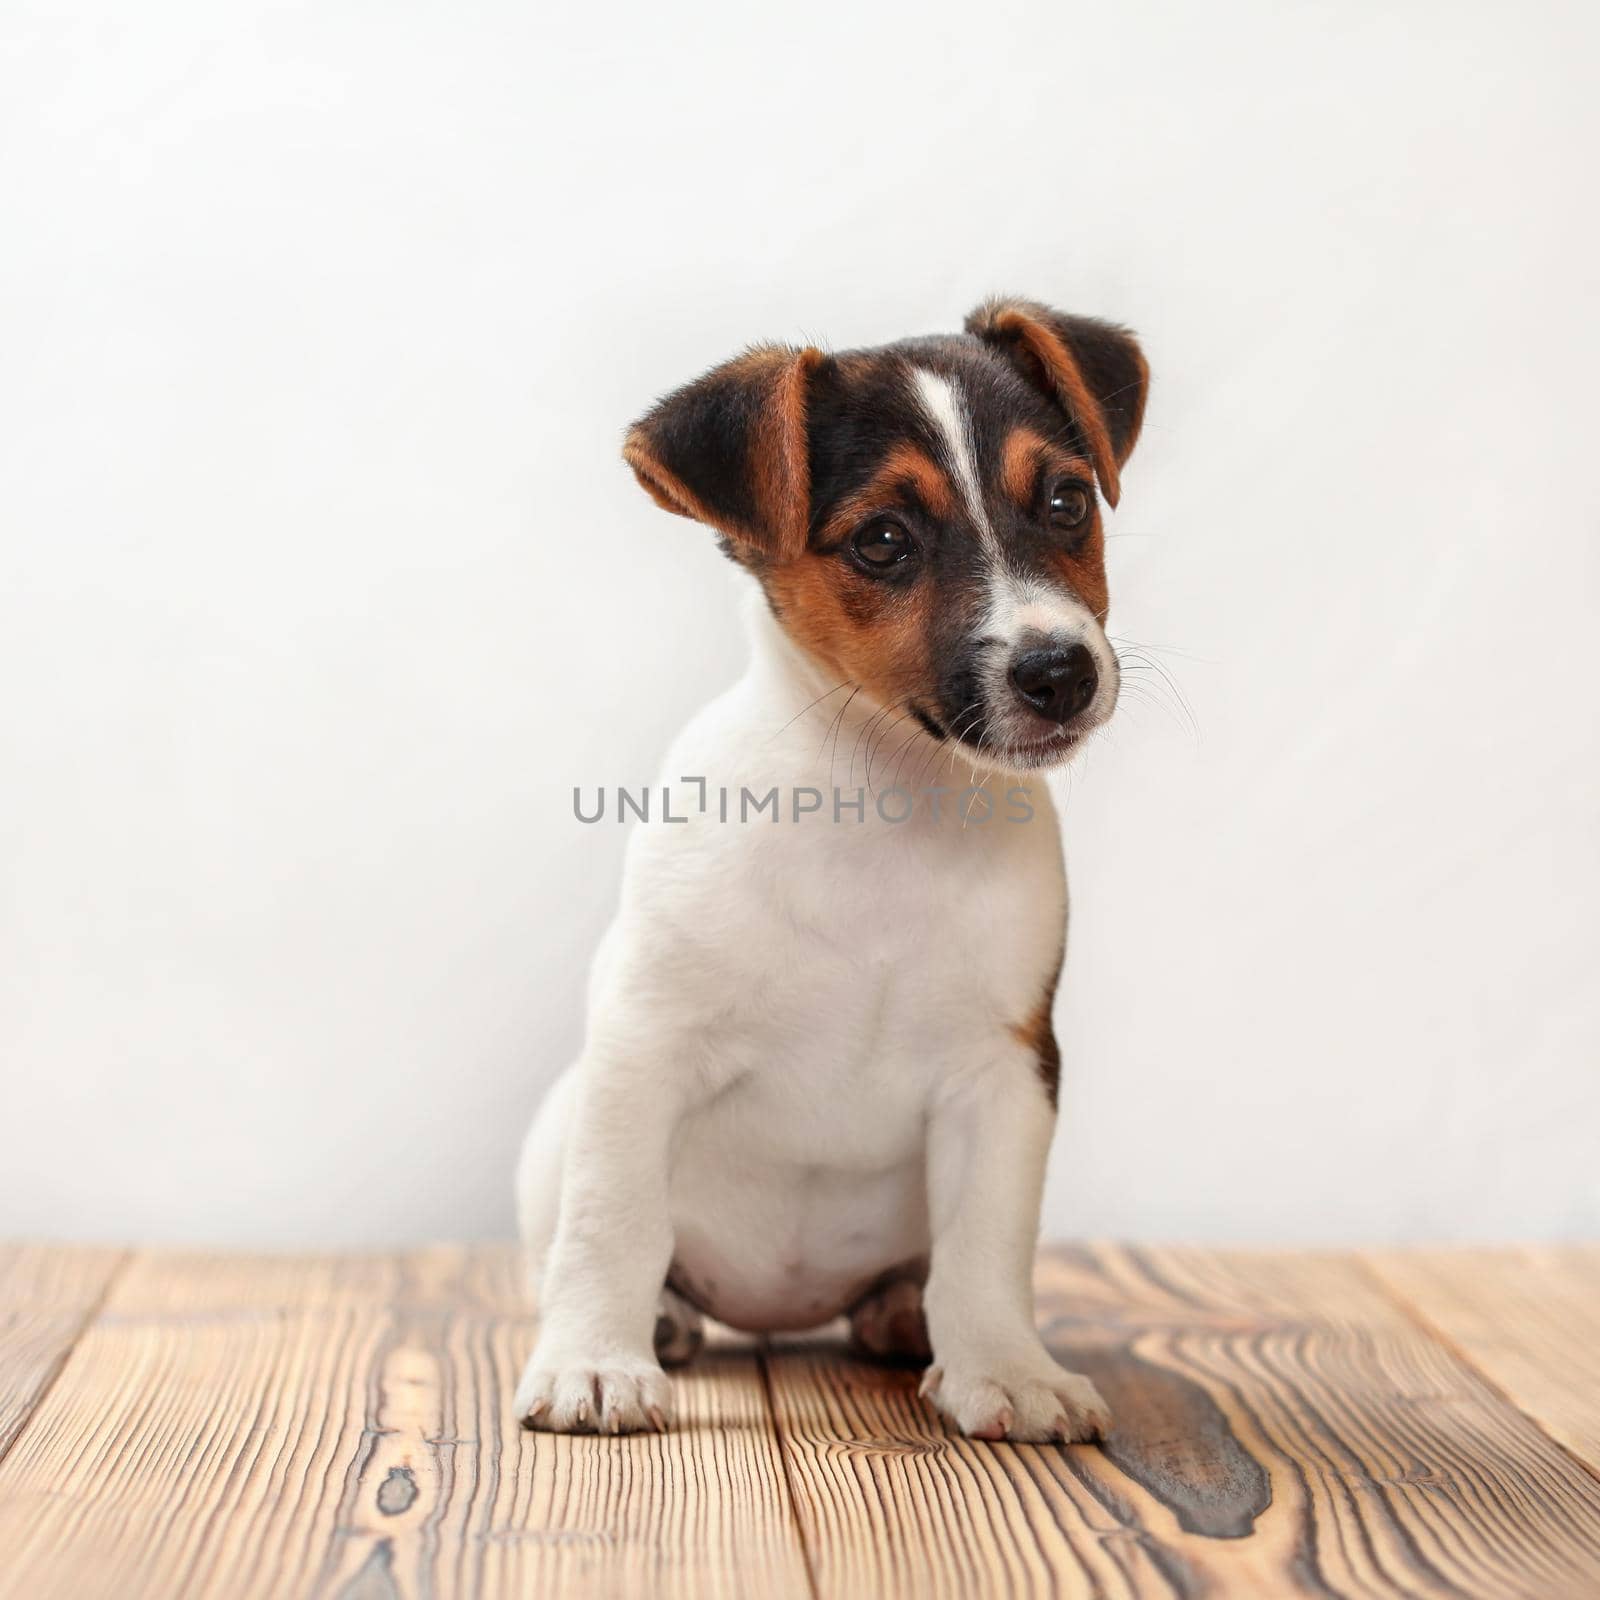 Two months old Jack Russell terrier puppy, studio shots on wooden boards with white background.